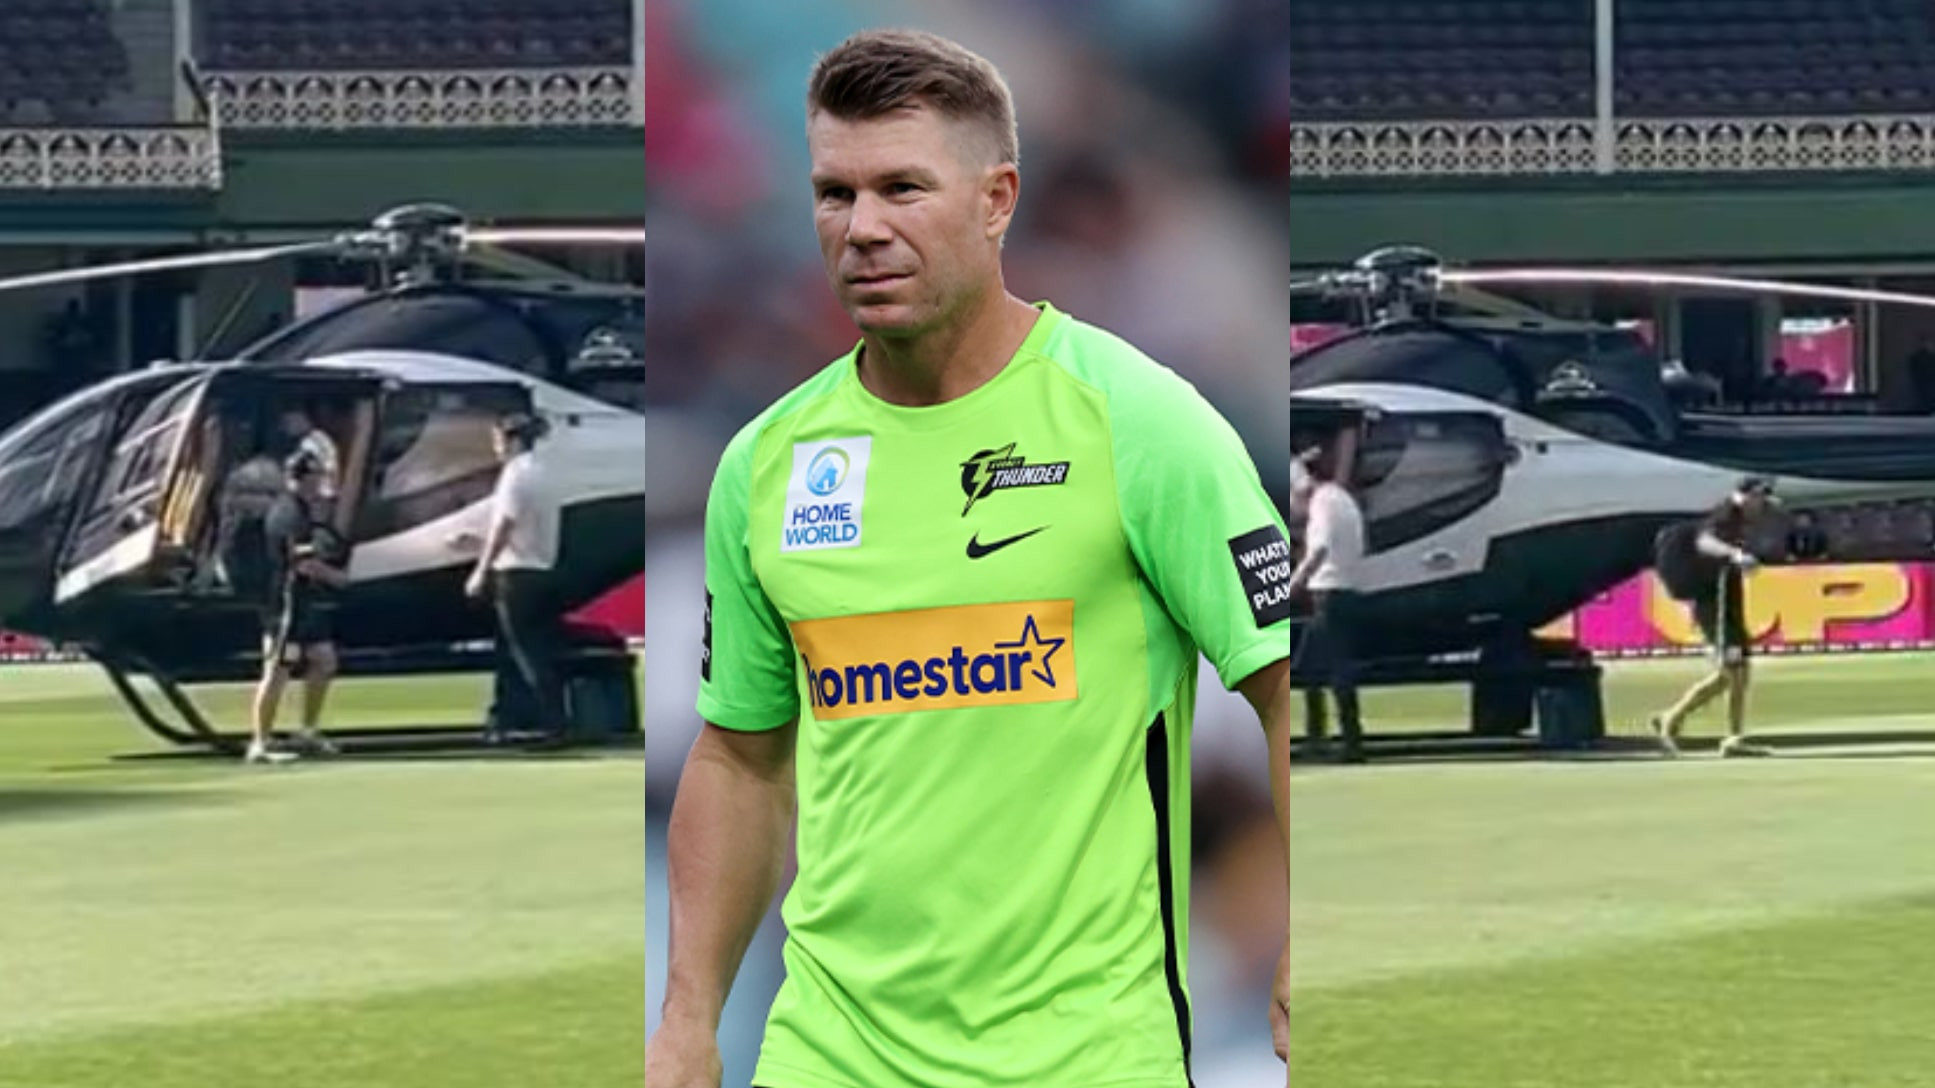 WATCH- David Warner arrives at SCG in a helicopter to play for Sydney Thunder in ongoing BBL 13